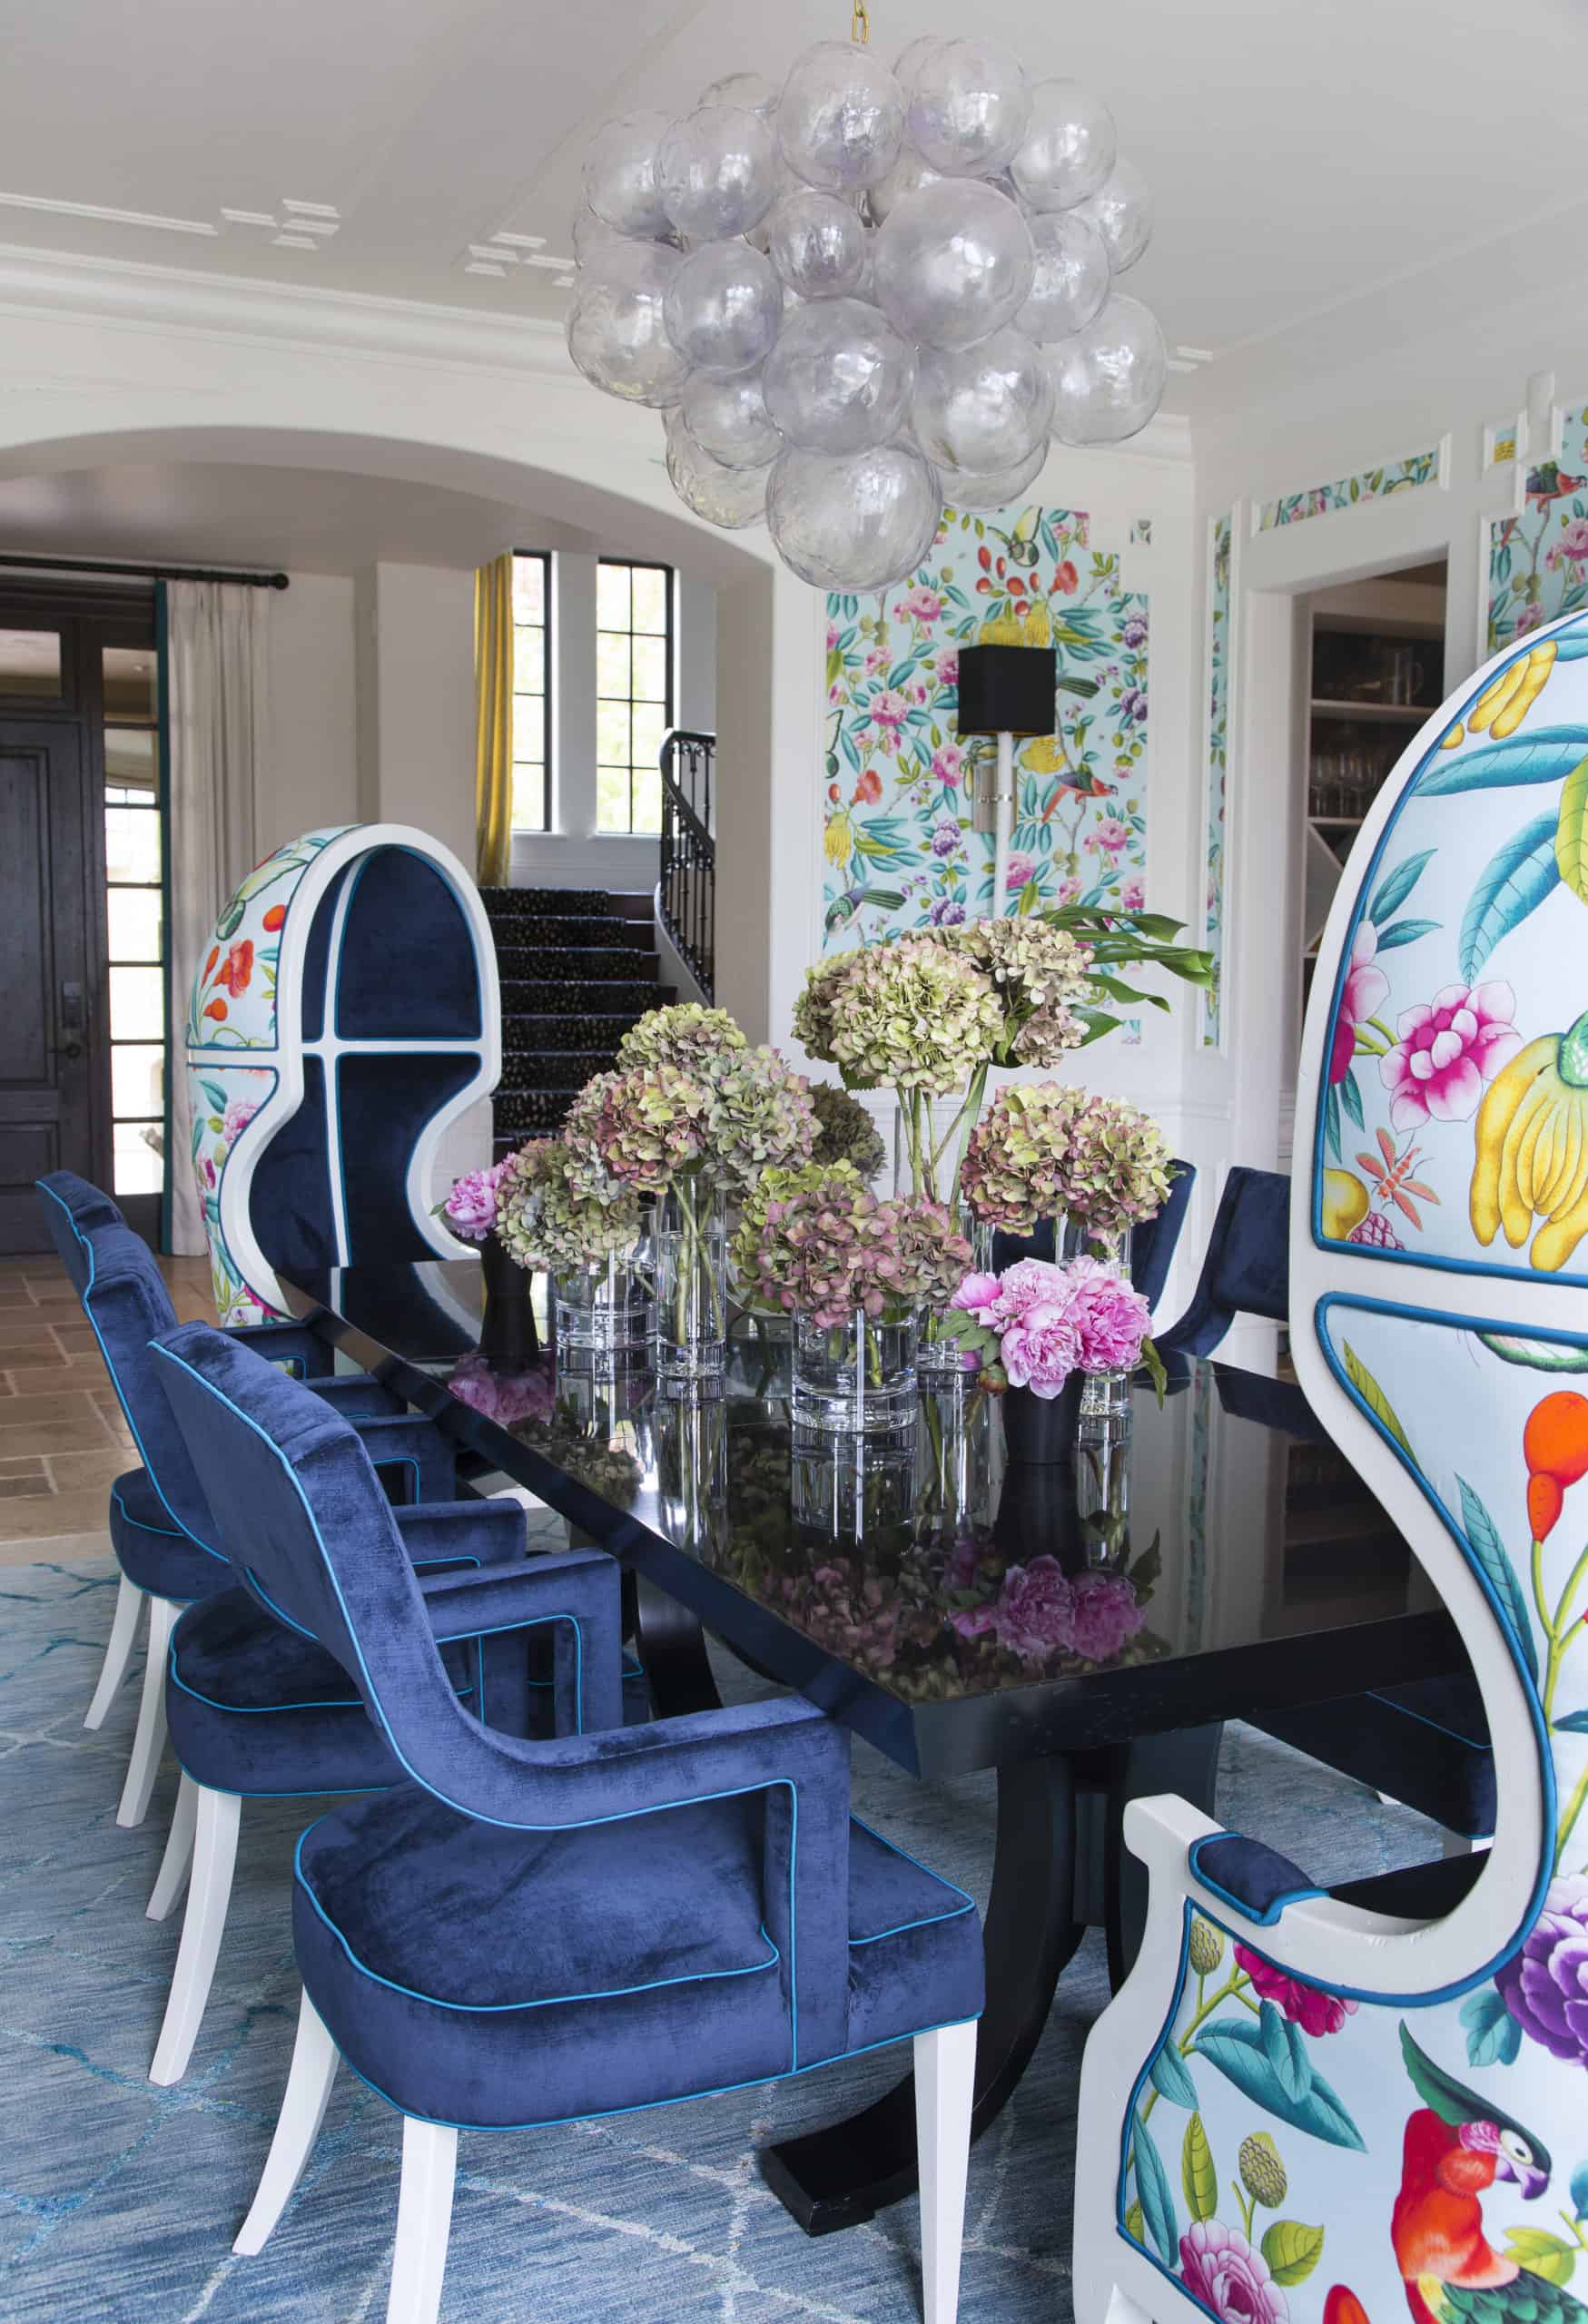 Bubble chandelier over whimsical dining space with colorful wallpaper